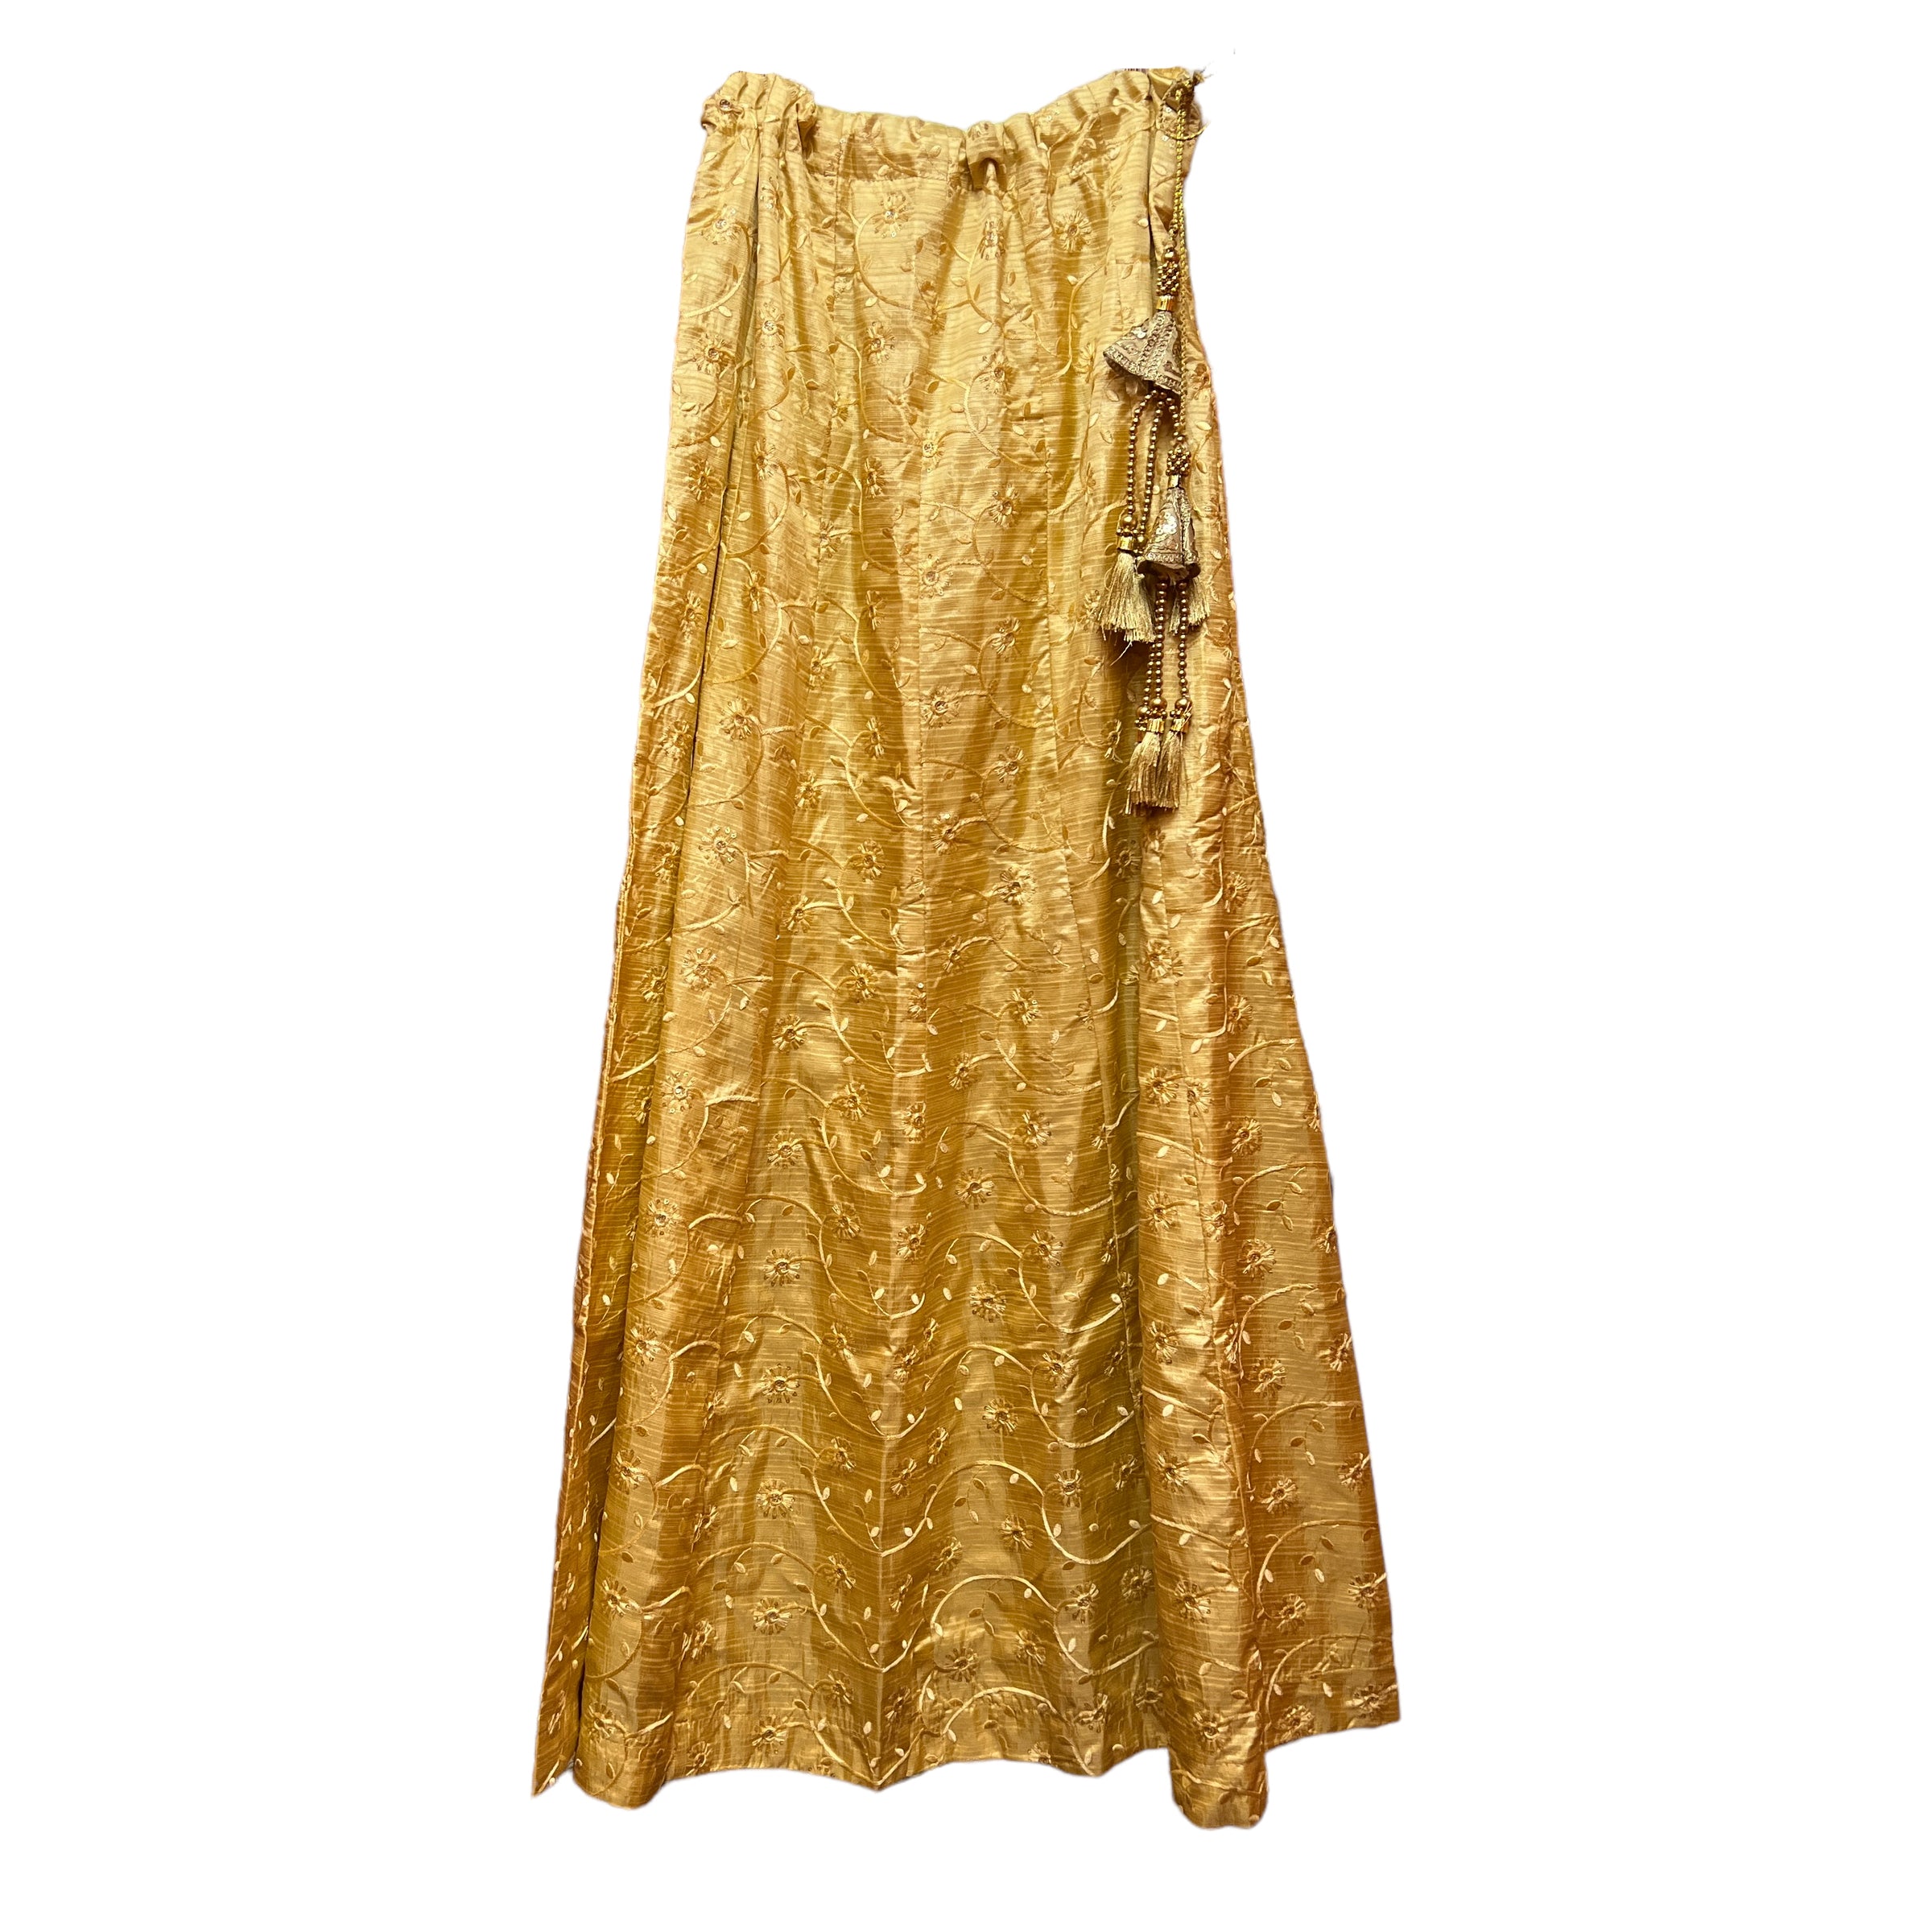 Q Gold Embroidered Lehengas - Vintage India NYC